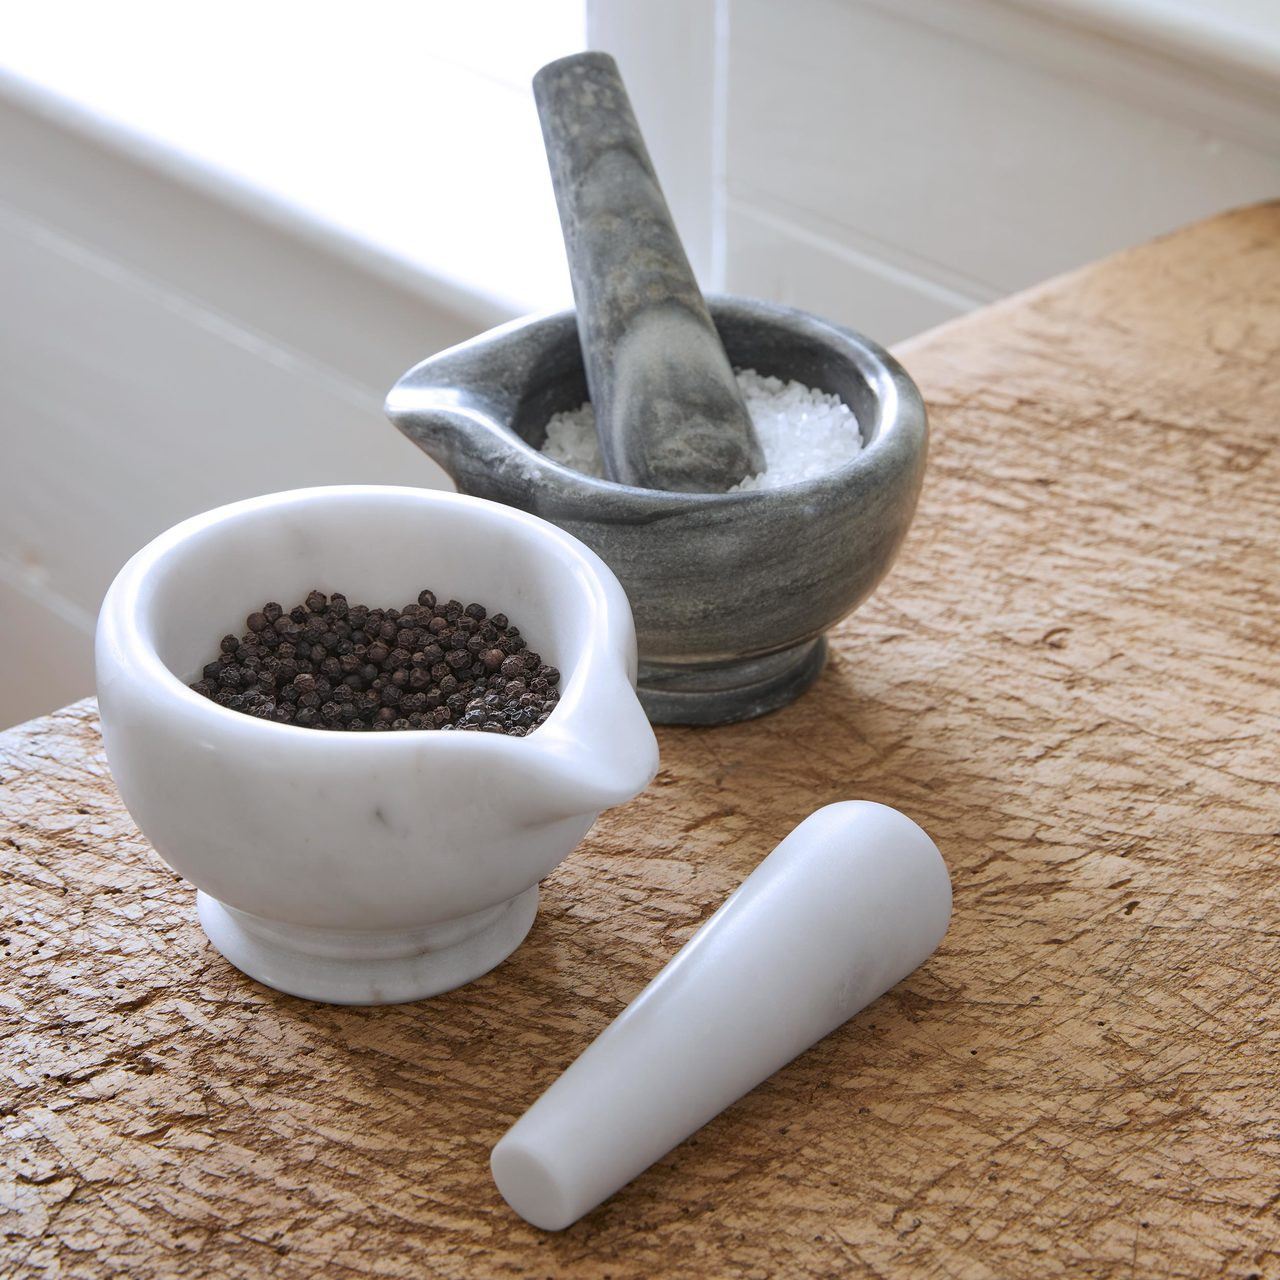 https://cdn10.bigcommerce.com/s-6c0hc1/products/584/images/2386/marble_mortarpestle_small_life__10221.1522345398.1280.1280.jpg?c=2